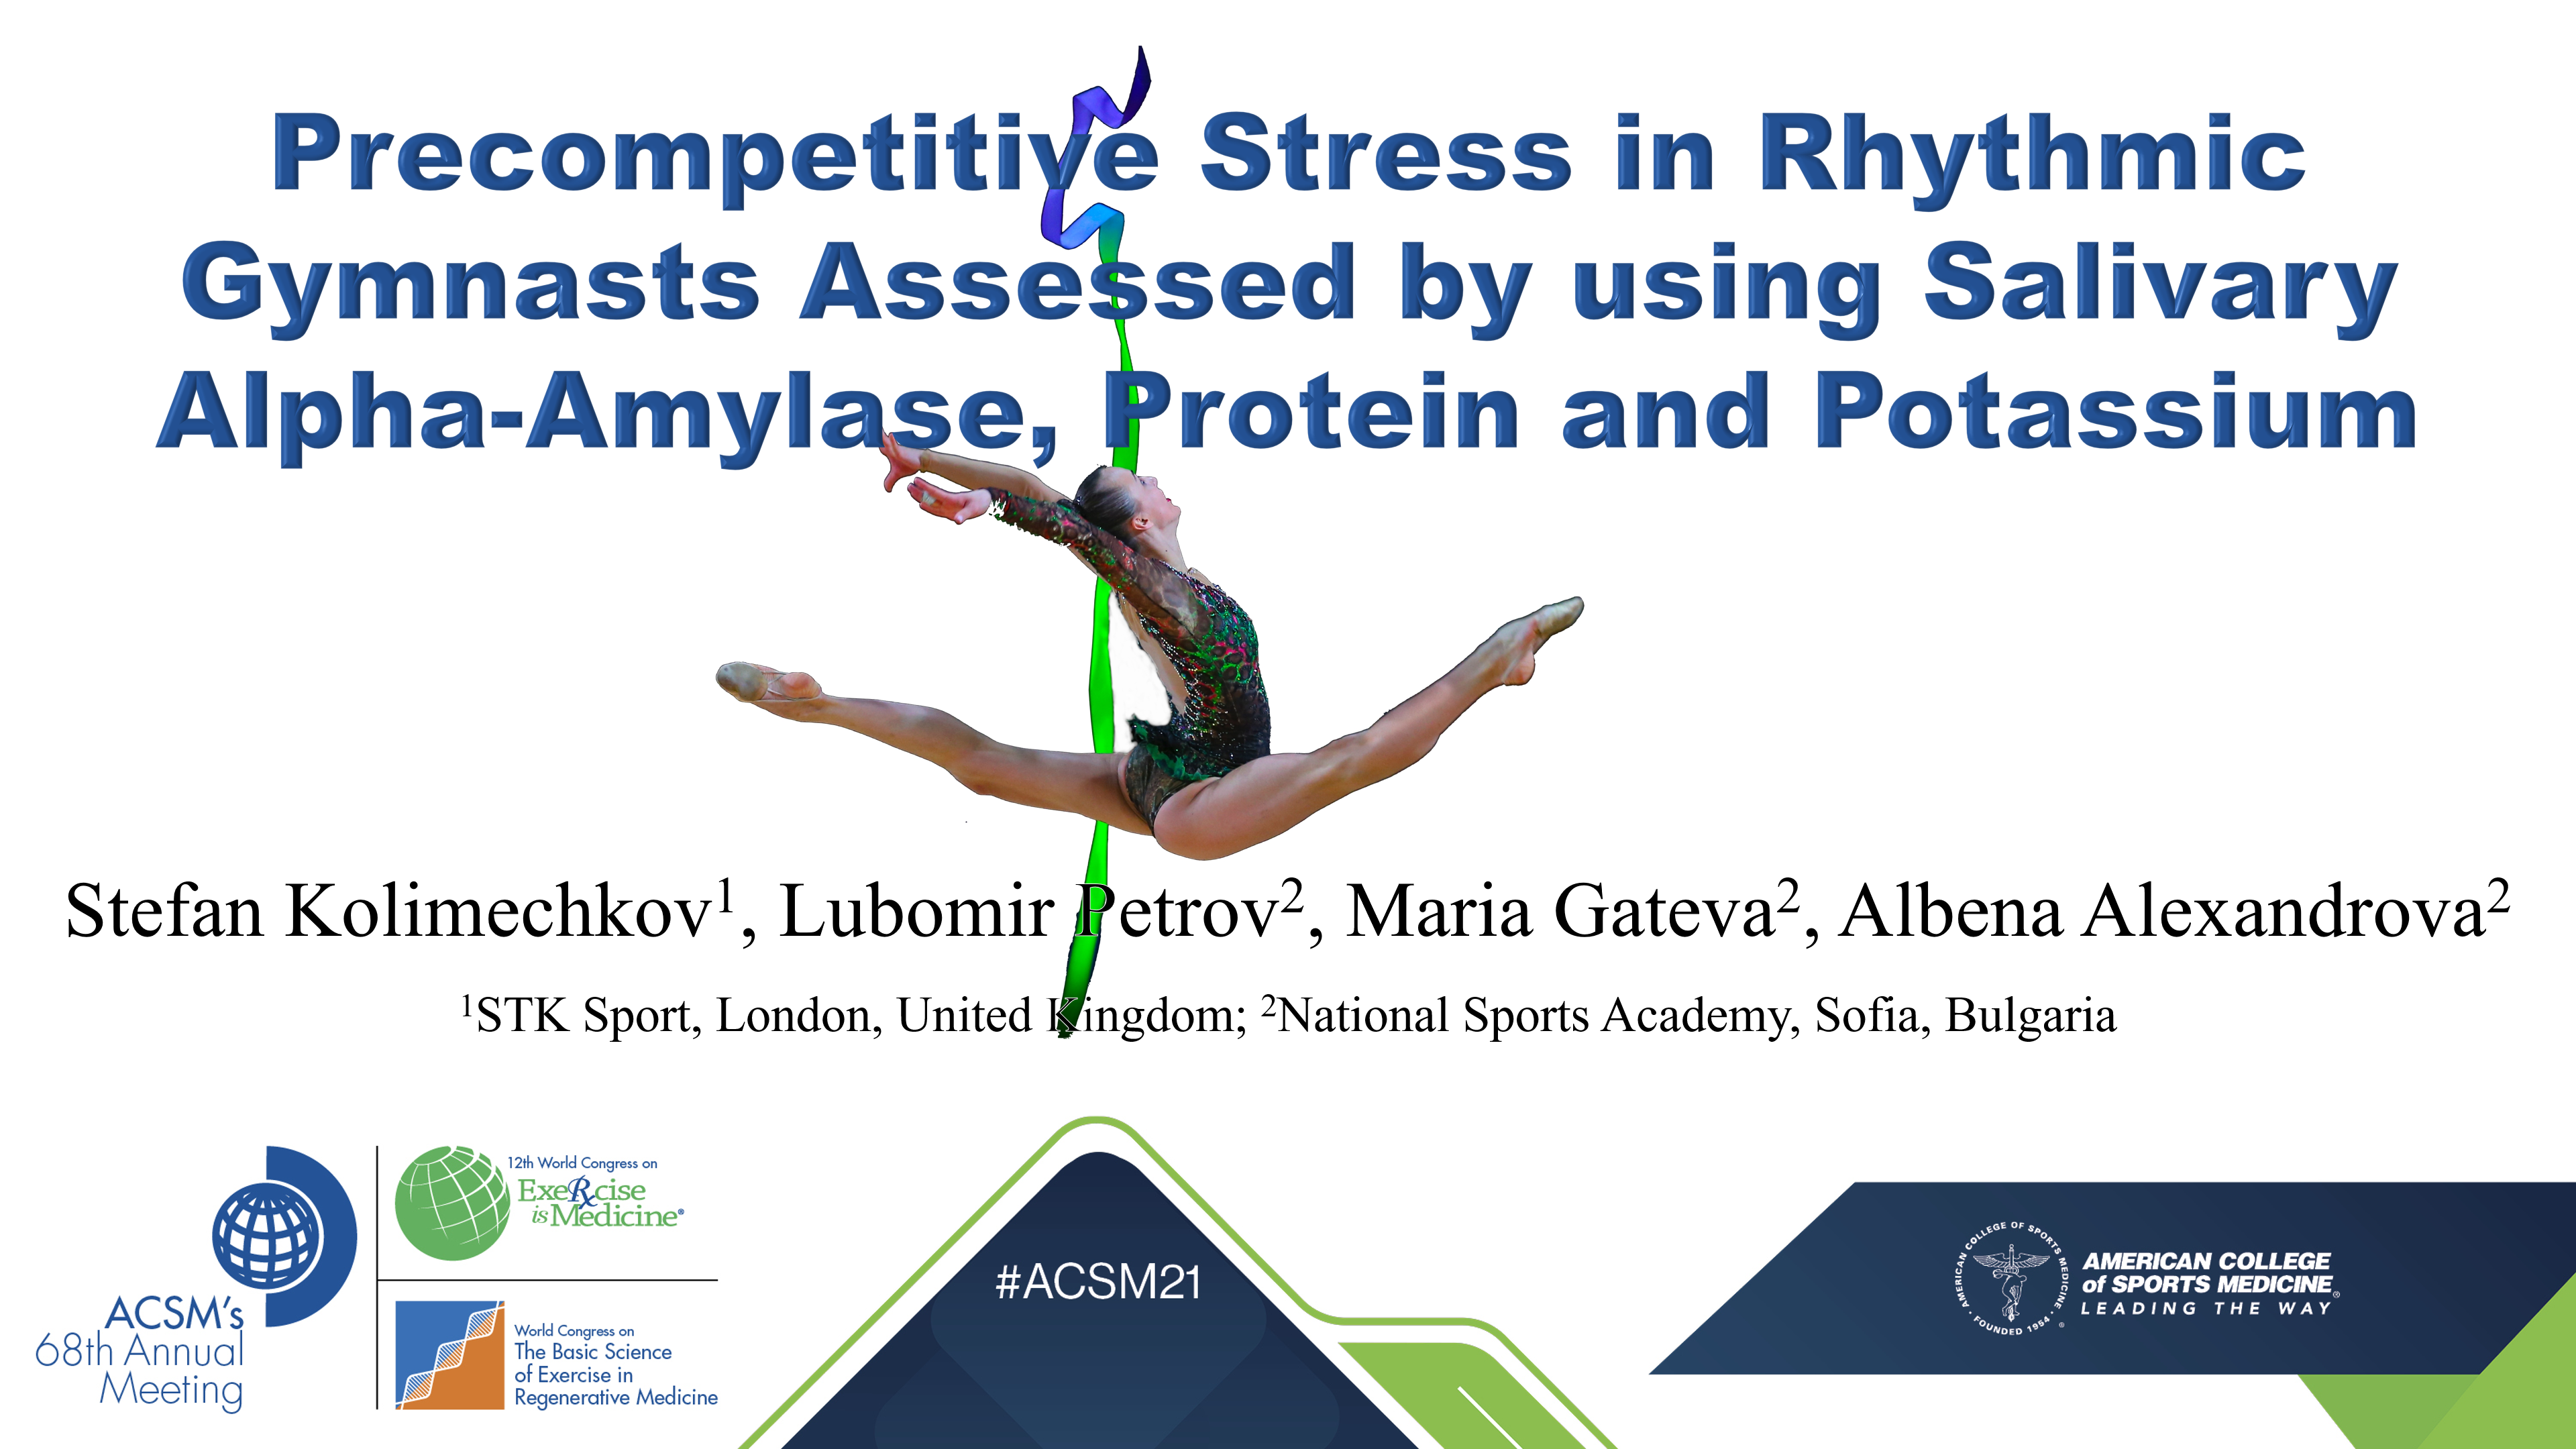 Precompetitive stress in rhythmic gymnasts assessed by using salivary alpha-amylase, protein and potassium